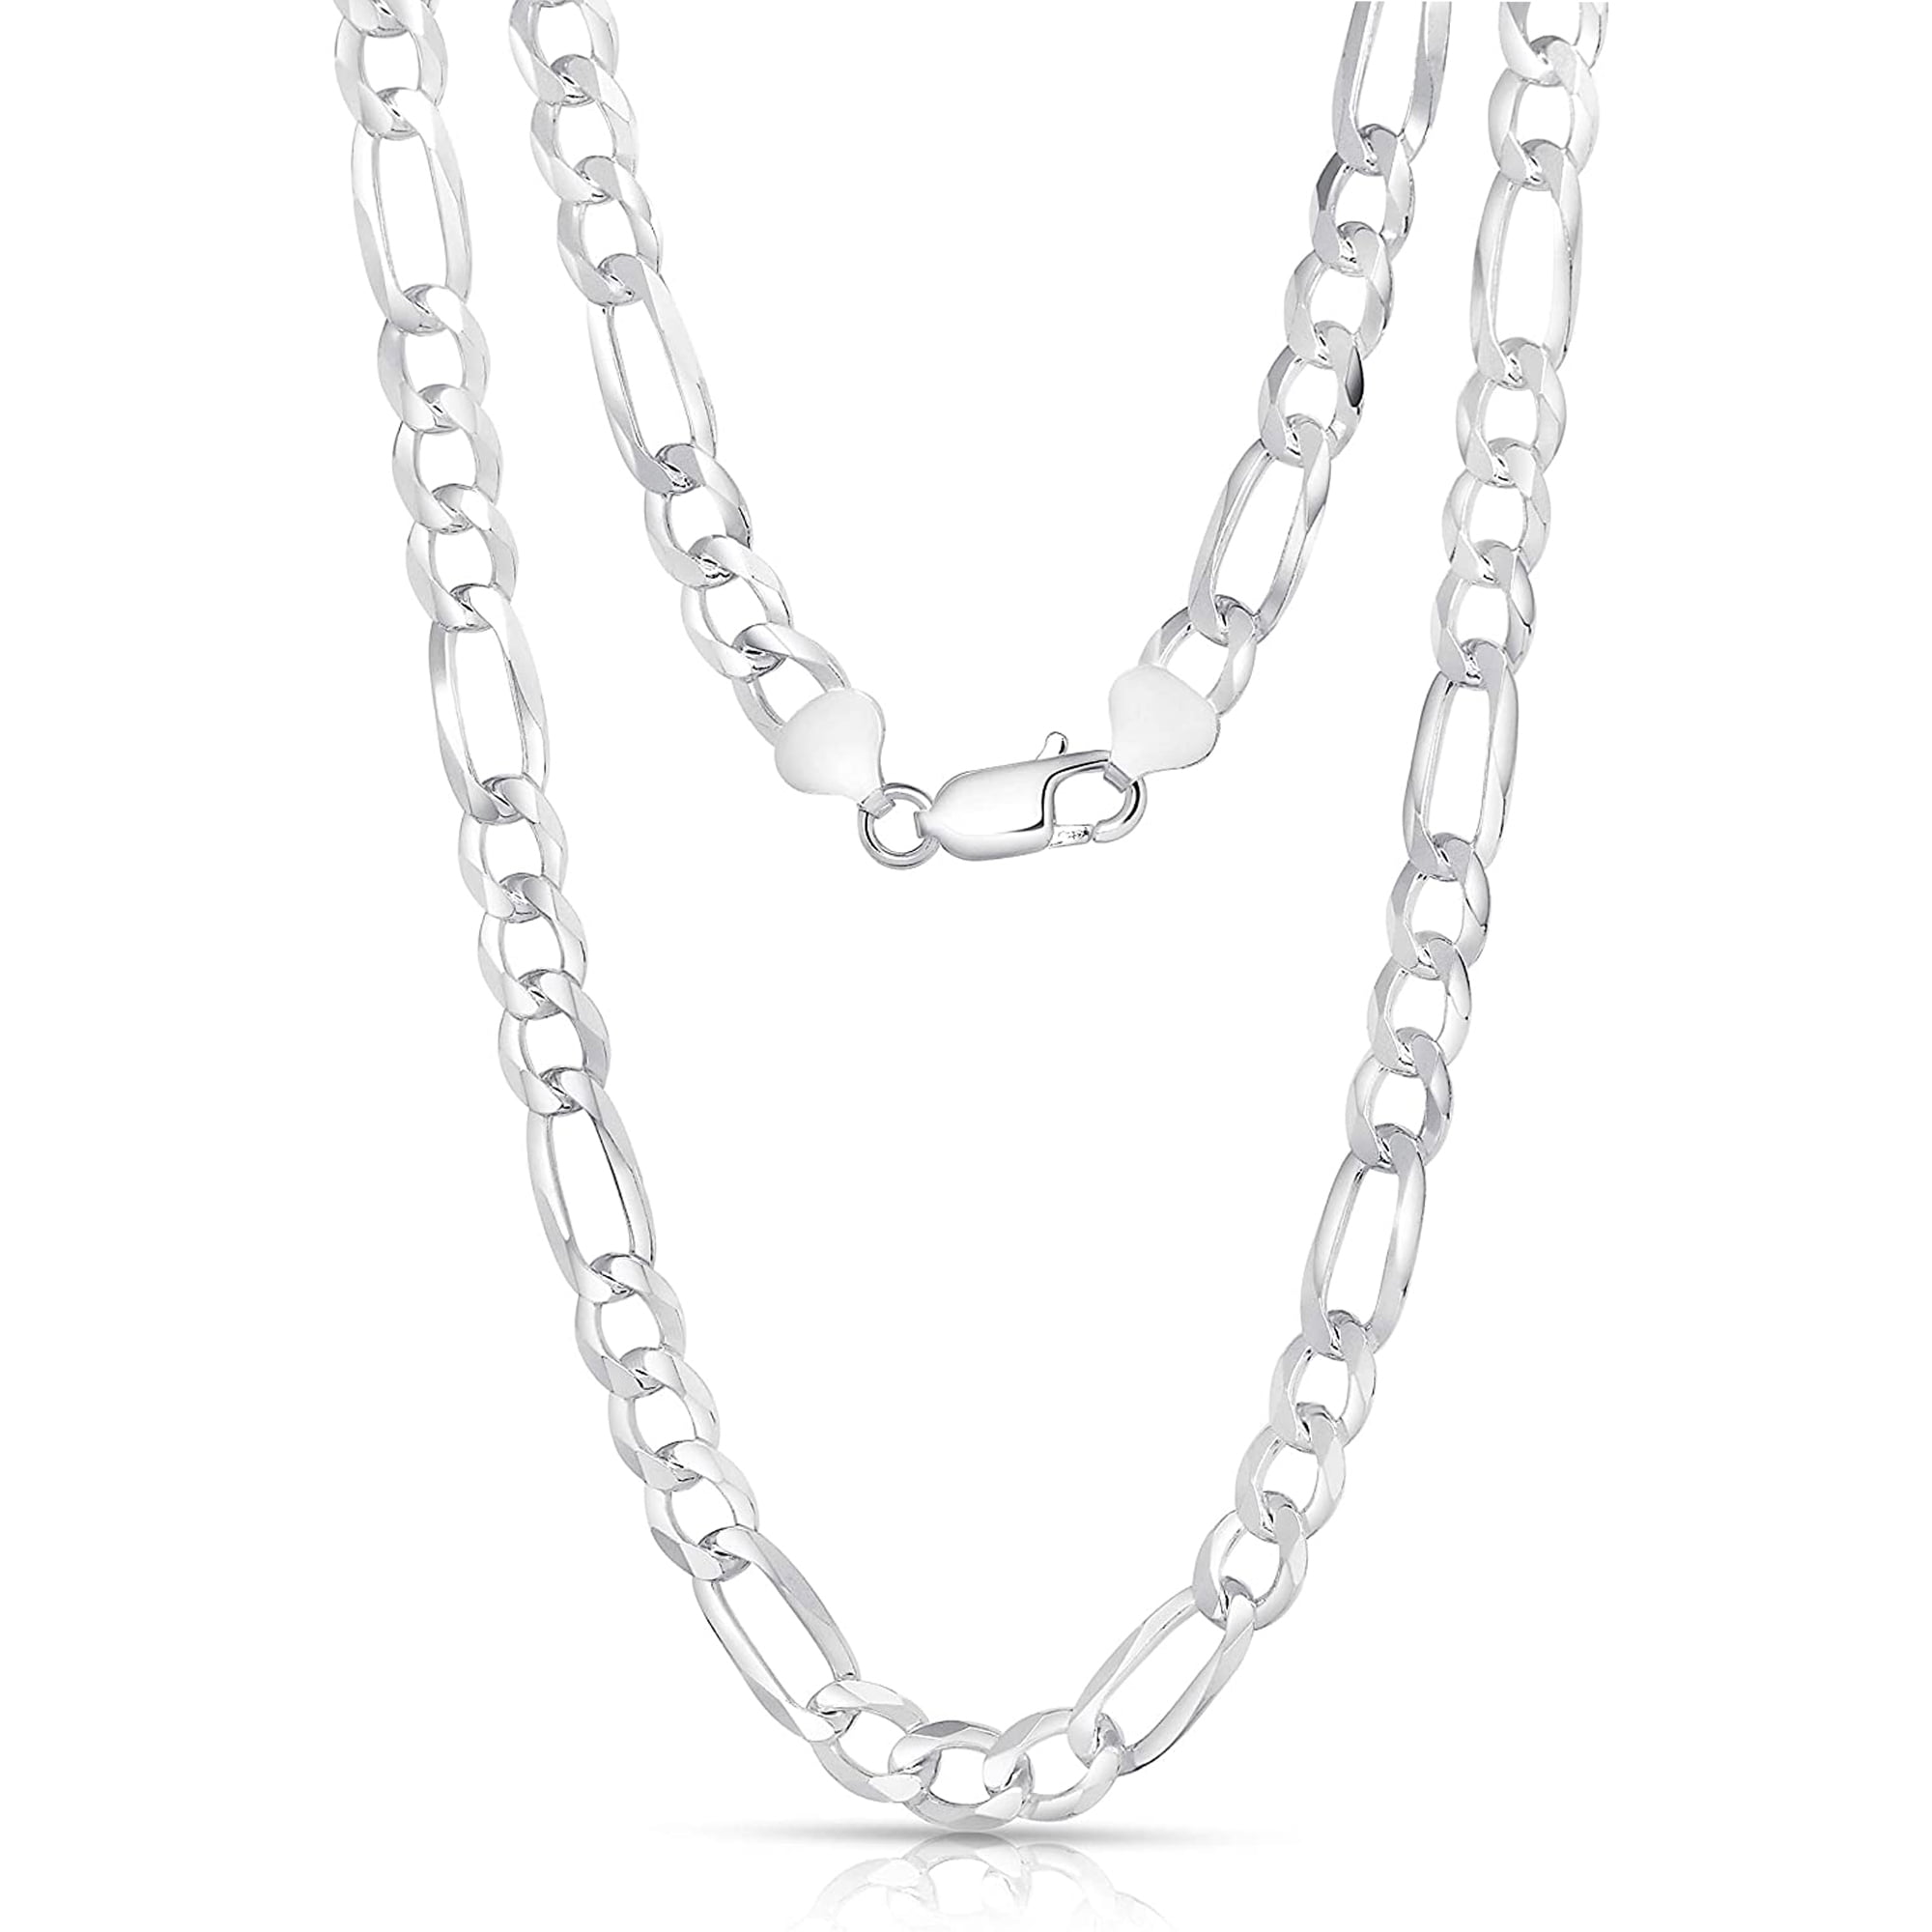 Hoops & Loops Sterling Silver 1.5mm Popcorn Chain Necklace 20-30 Inches